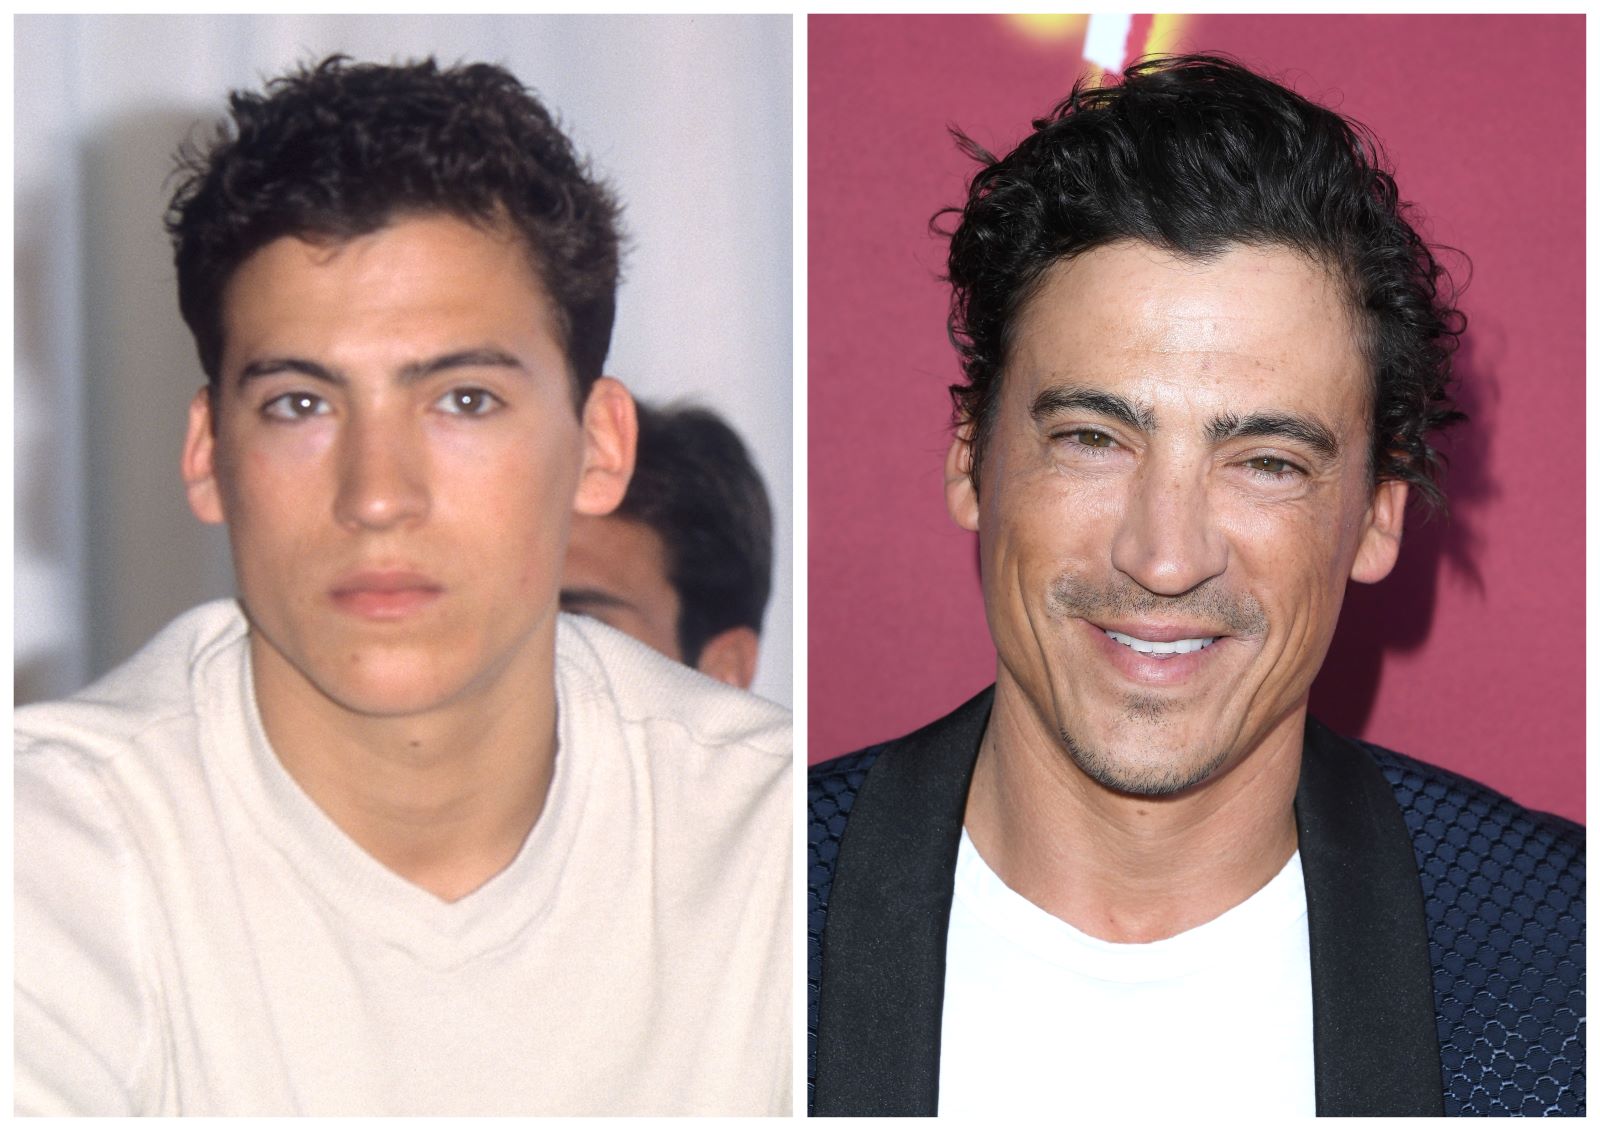 '10 Things I Hate About You' cast member Andrew Keegan